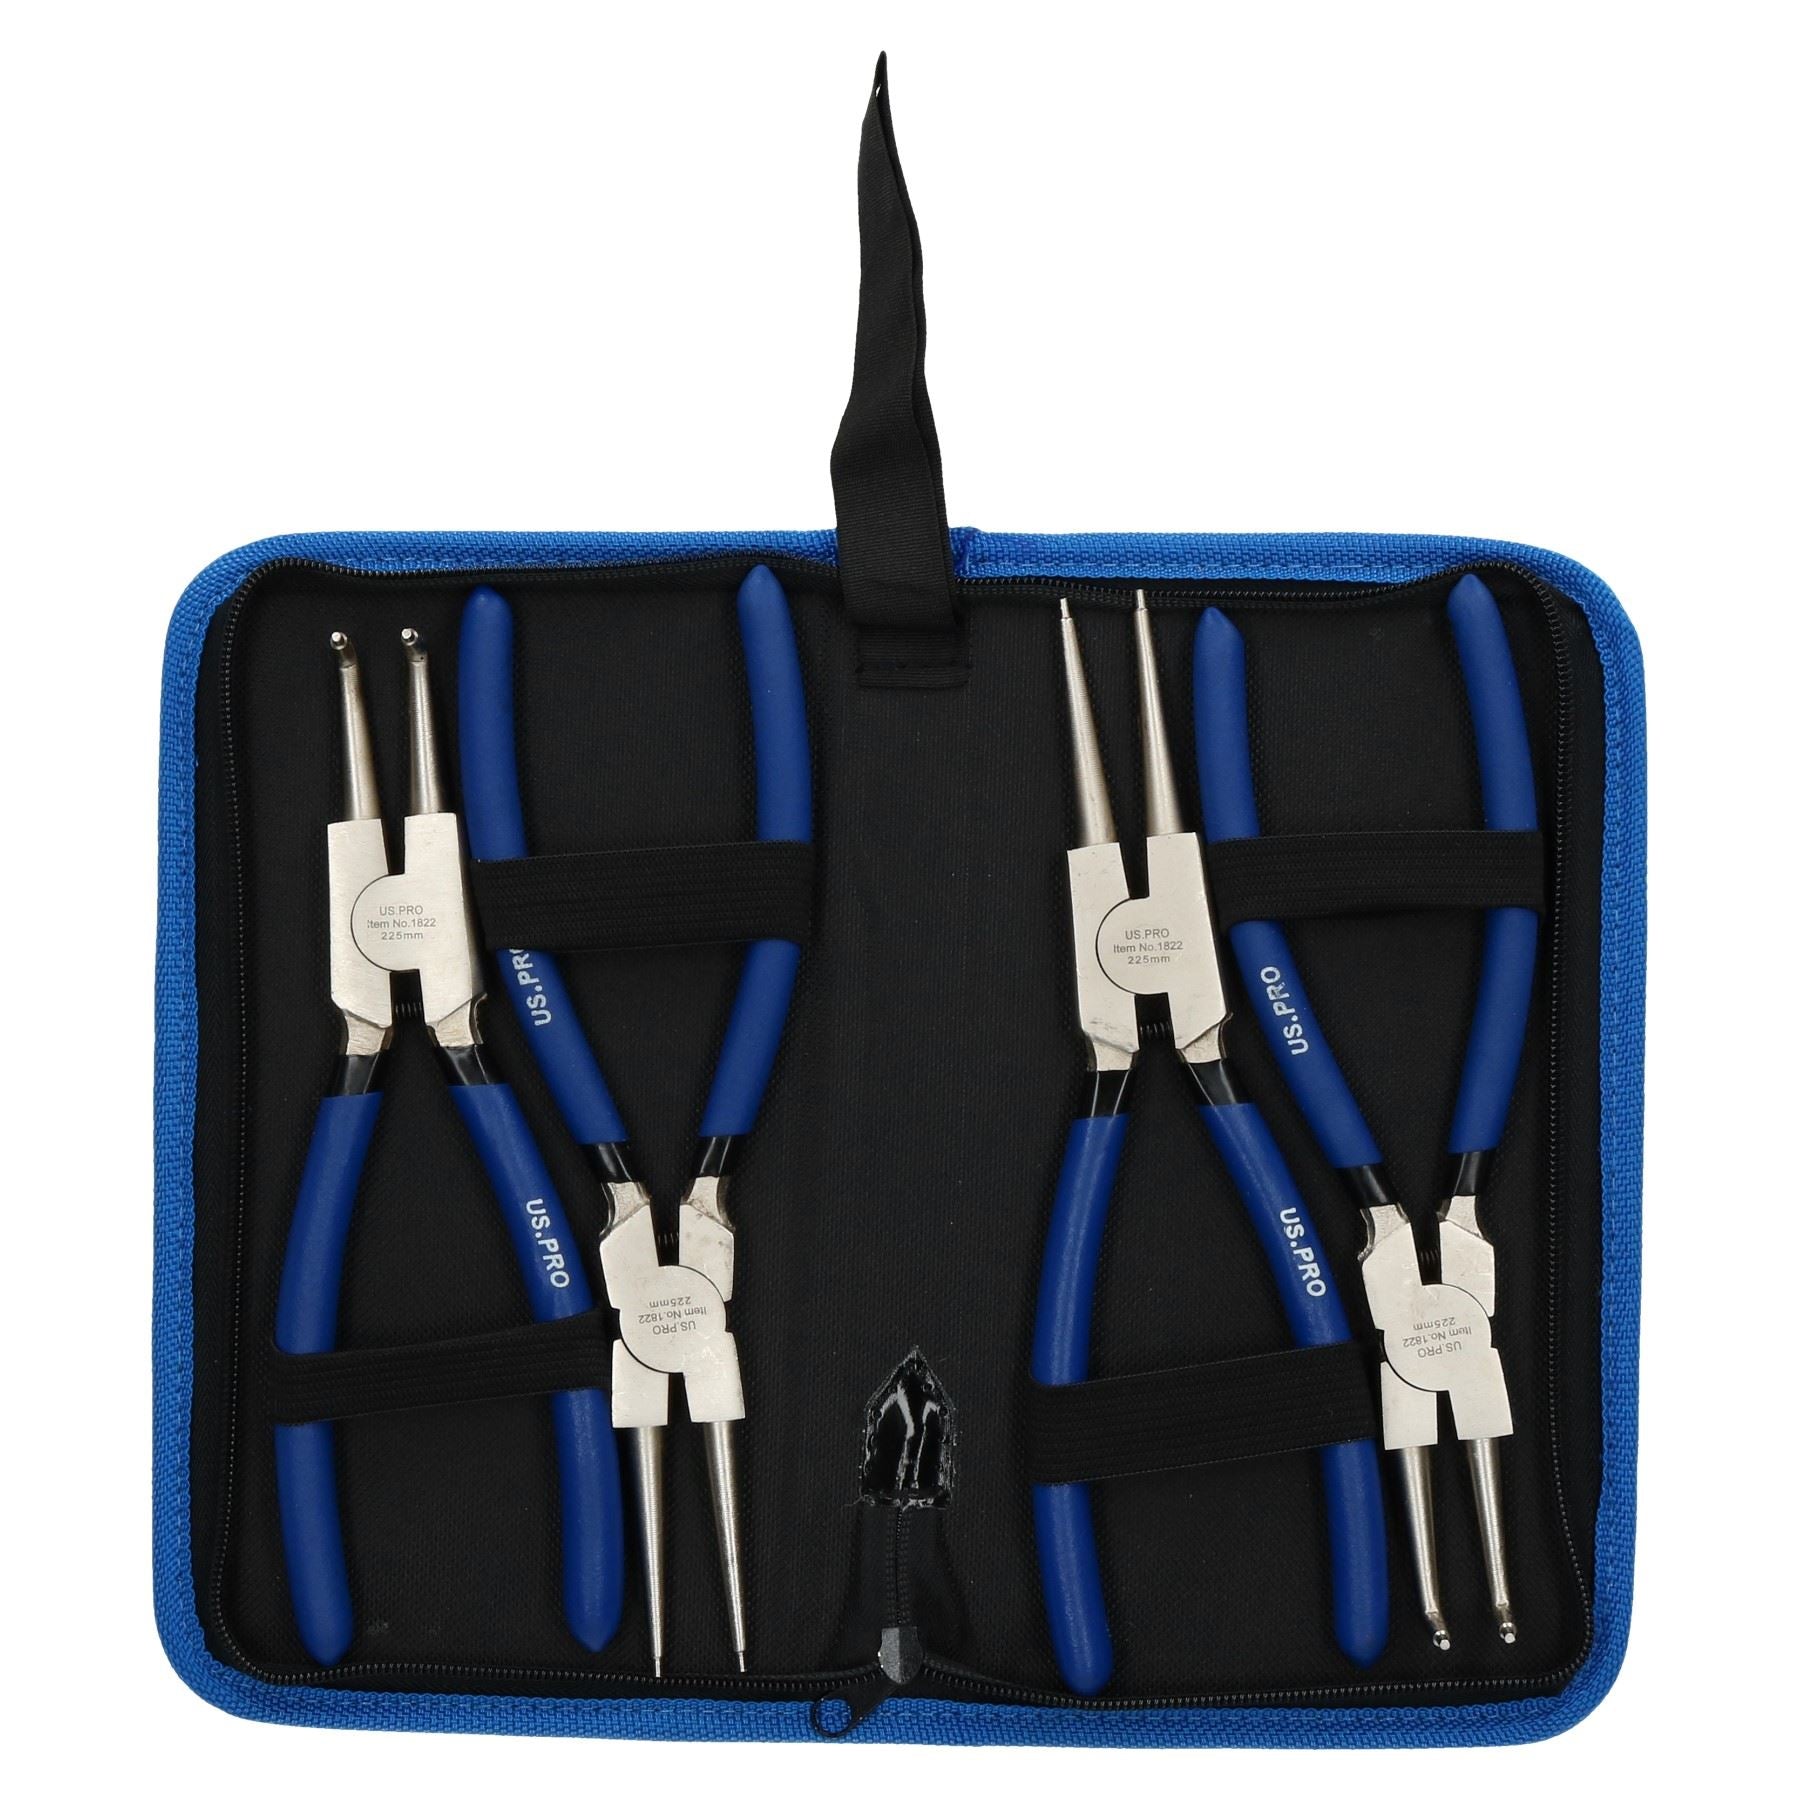 4pc 9" circlip plier pliers set in a carry case internal / external AT429